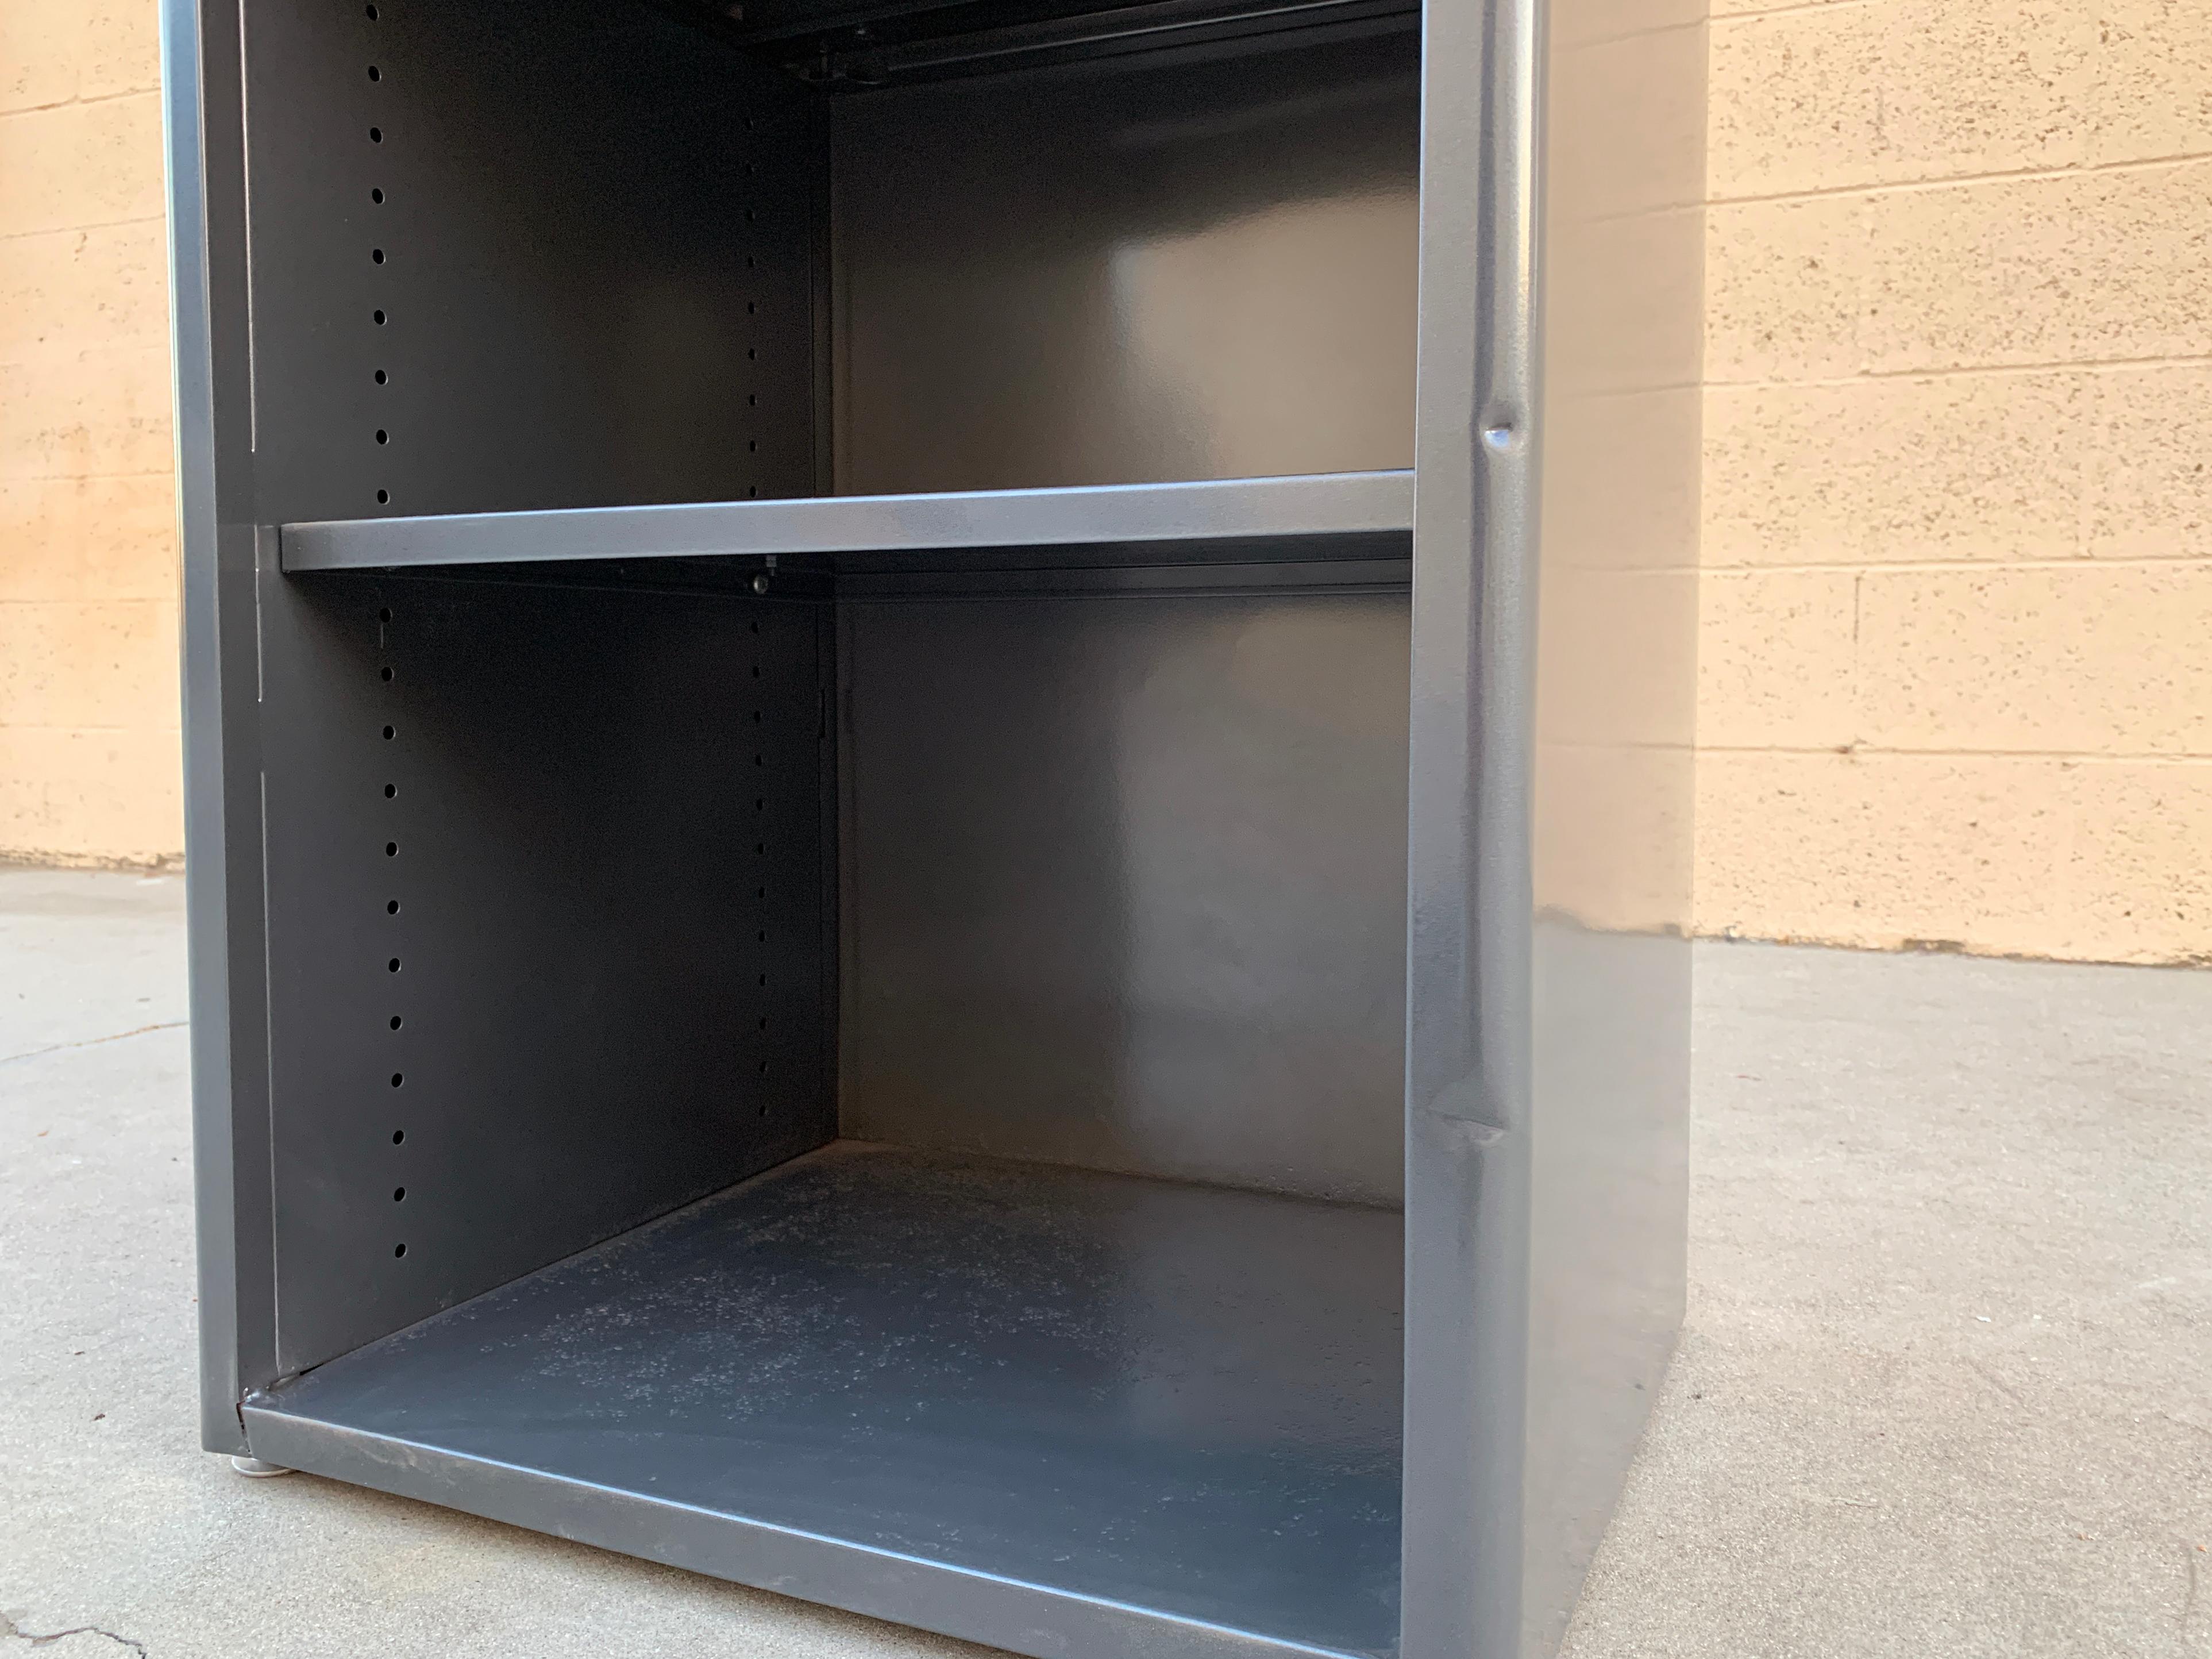 1960s Steelcase Side Cabinet Refinished in Metallic Gray In Good Condition For Sale In Alhambra, CA